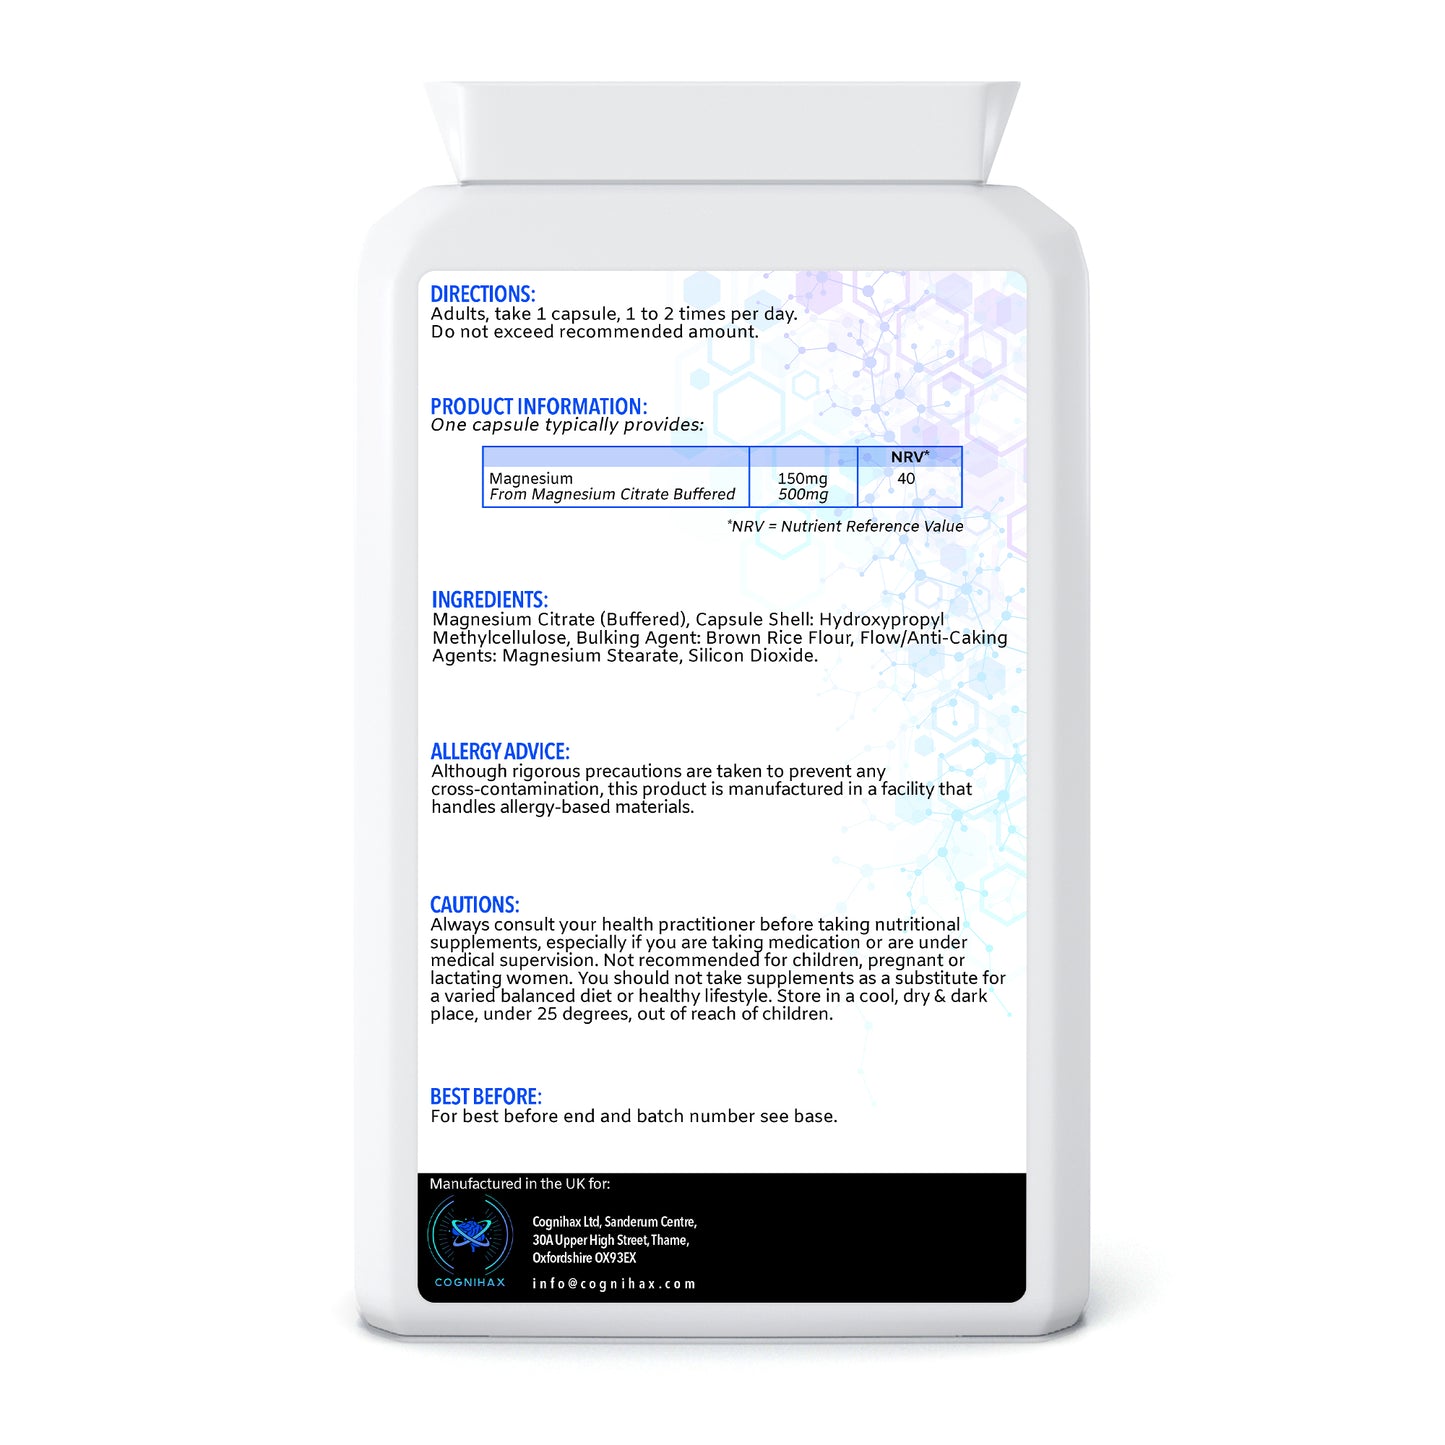 Magnesium Citrate 500mg. 2-4 months supply.